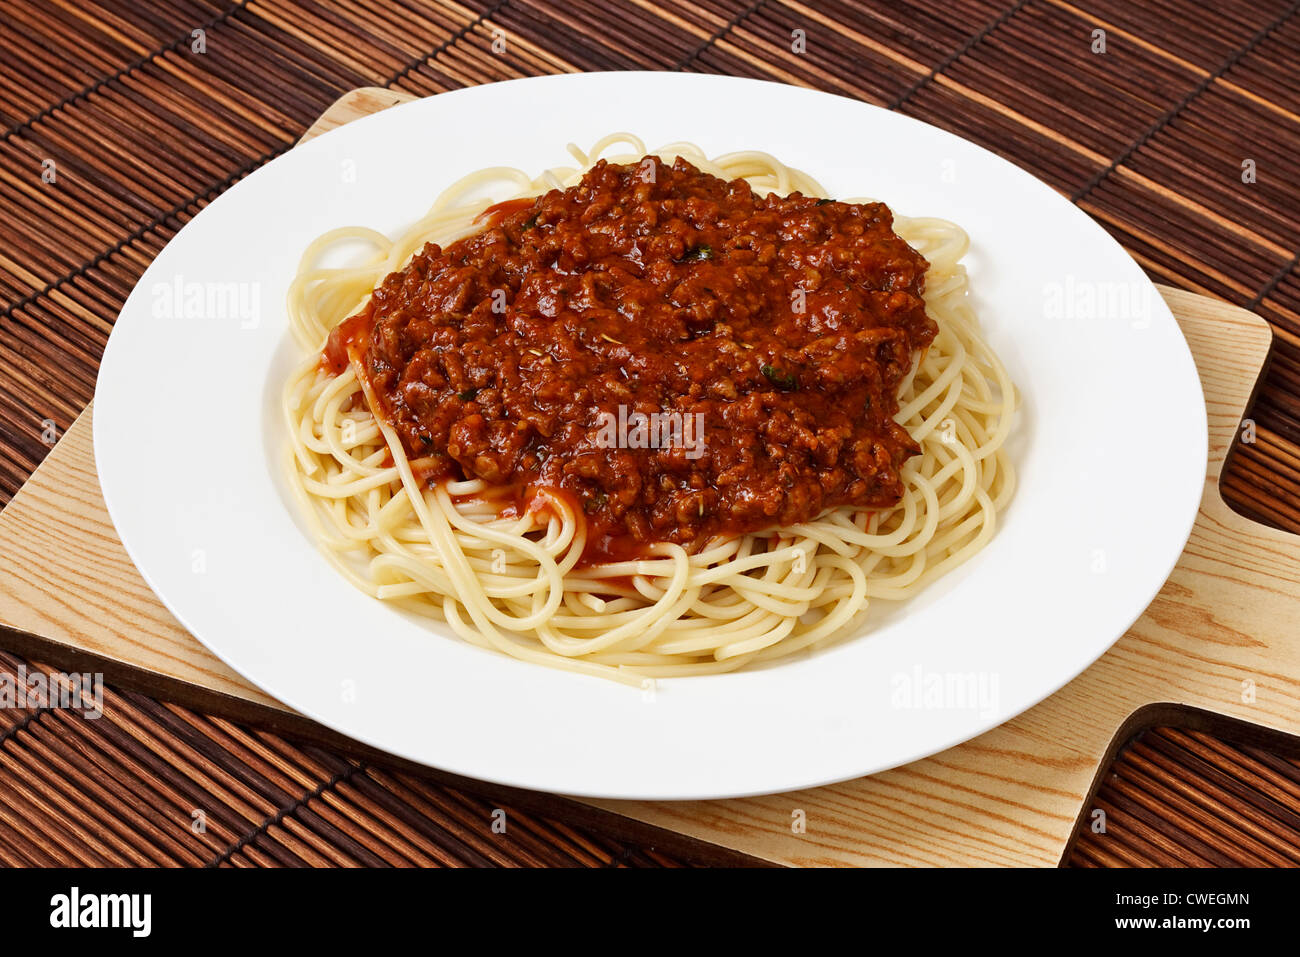 Spaghetti Bolognese Classic Italian food and a popular dinner dish around the world Stock Photo